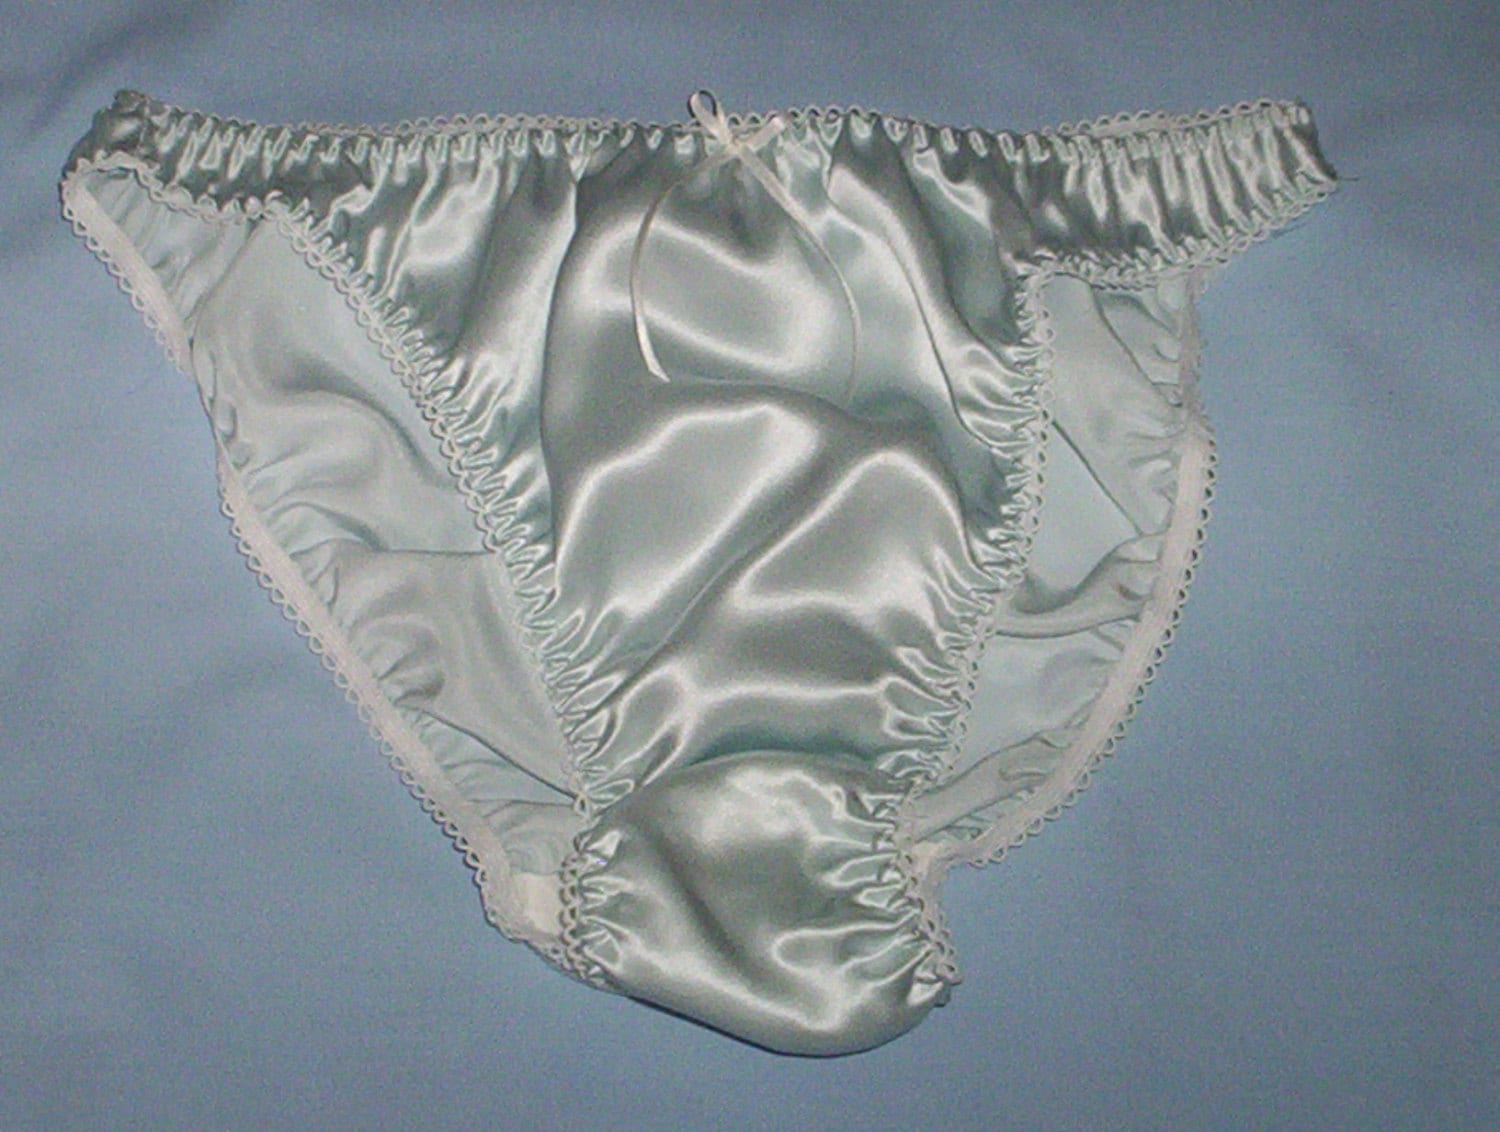 Powder Blue Silk Satin Panties Available In Uk By Tigerlizzylou